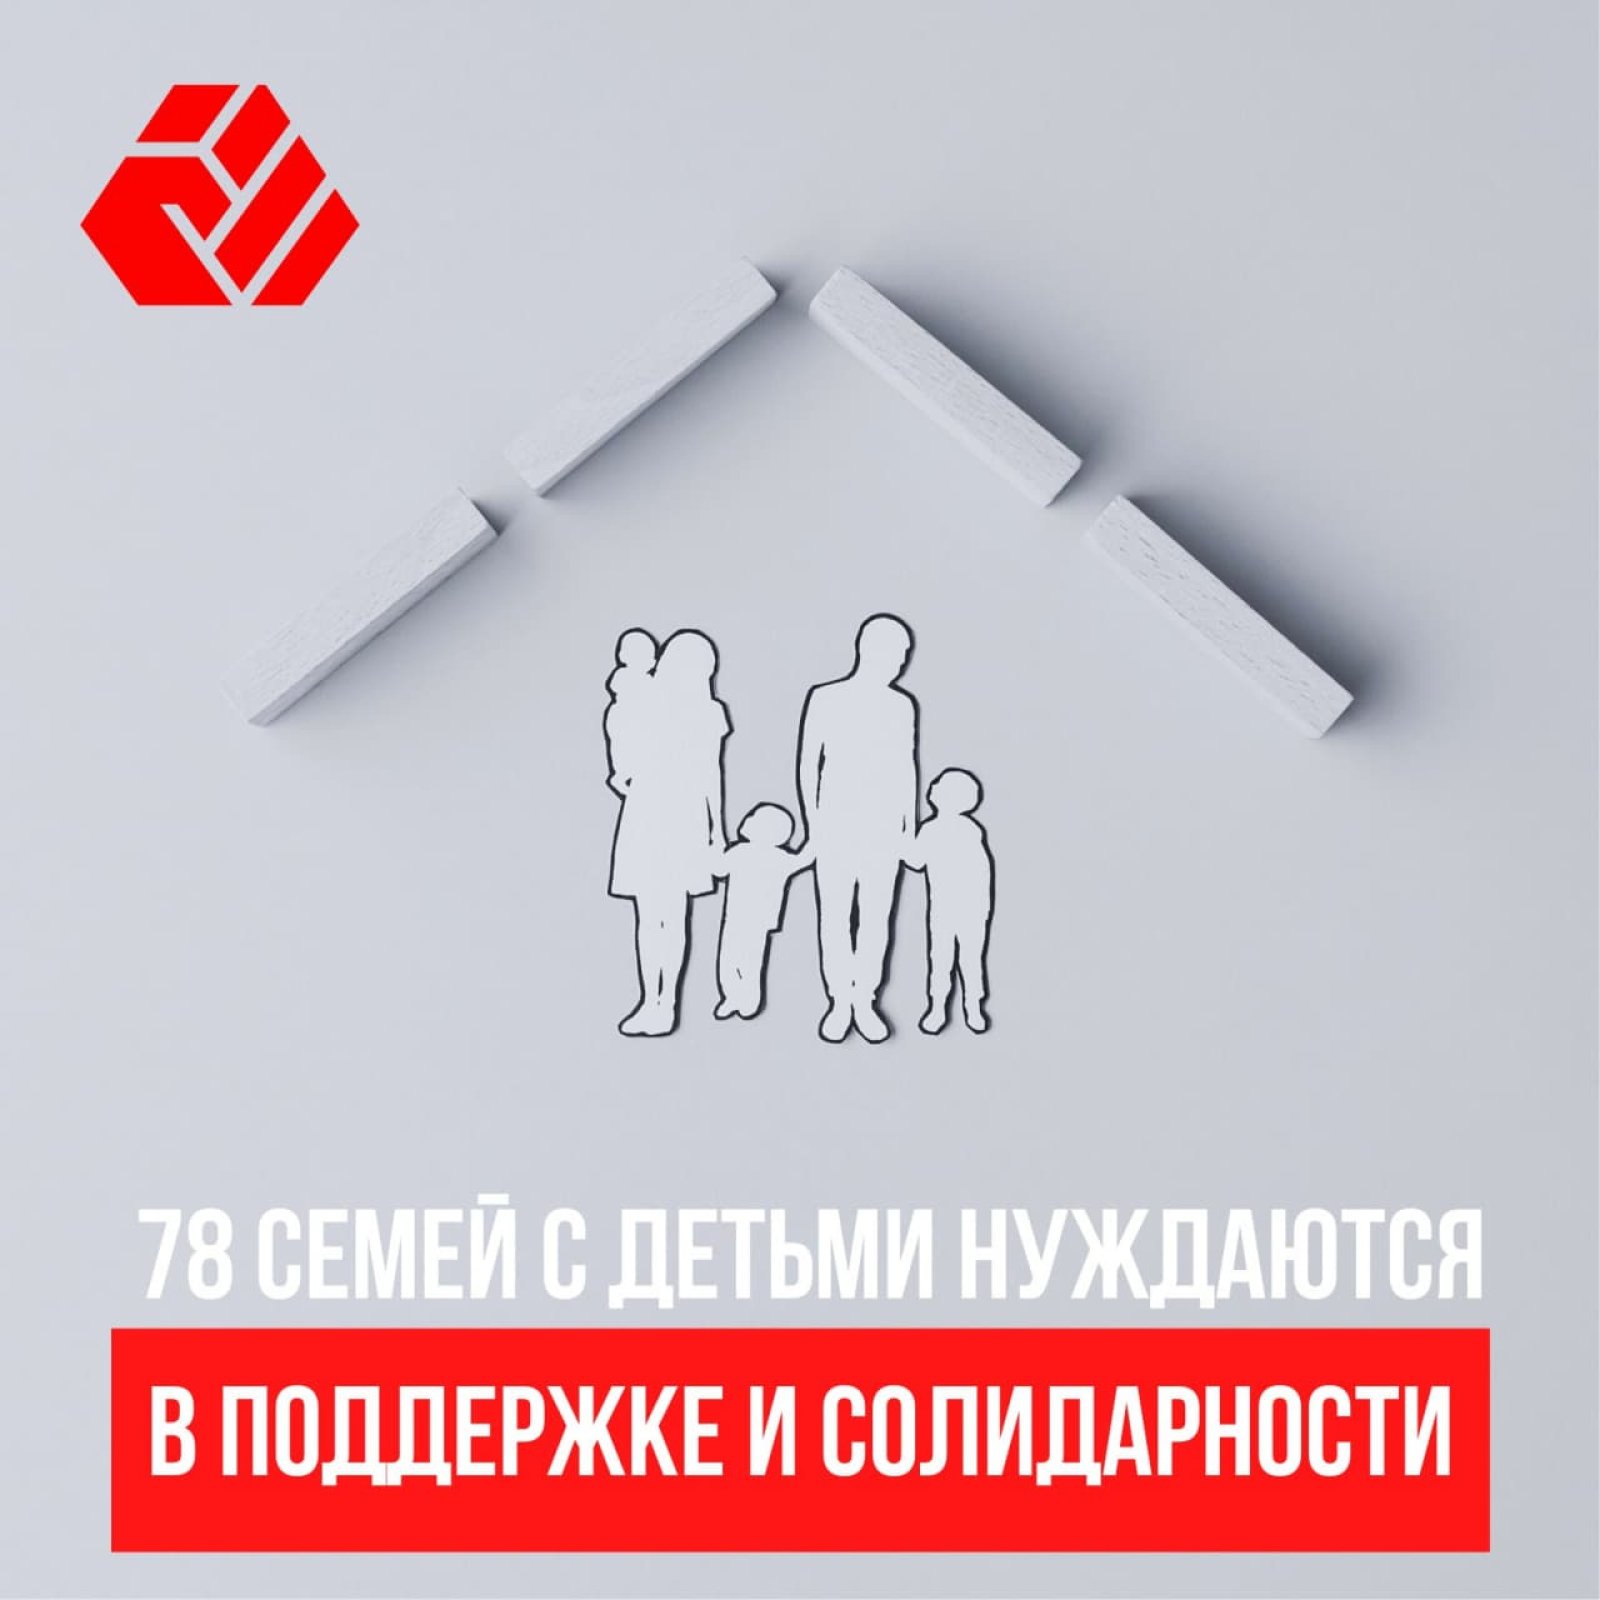 78 families with children need support and solidarity of Belarusians